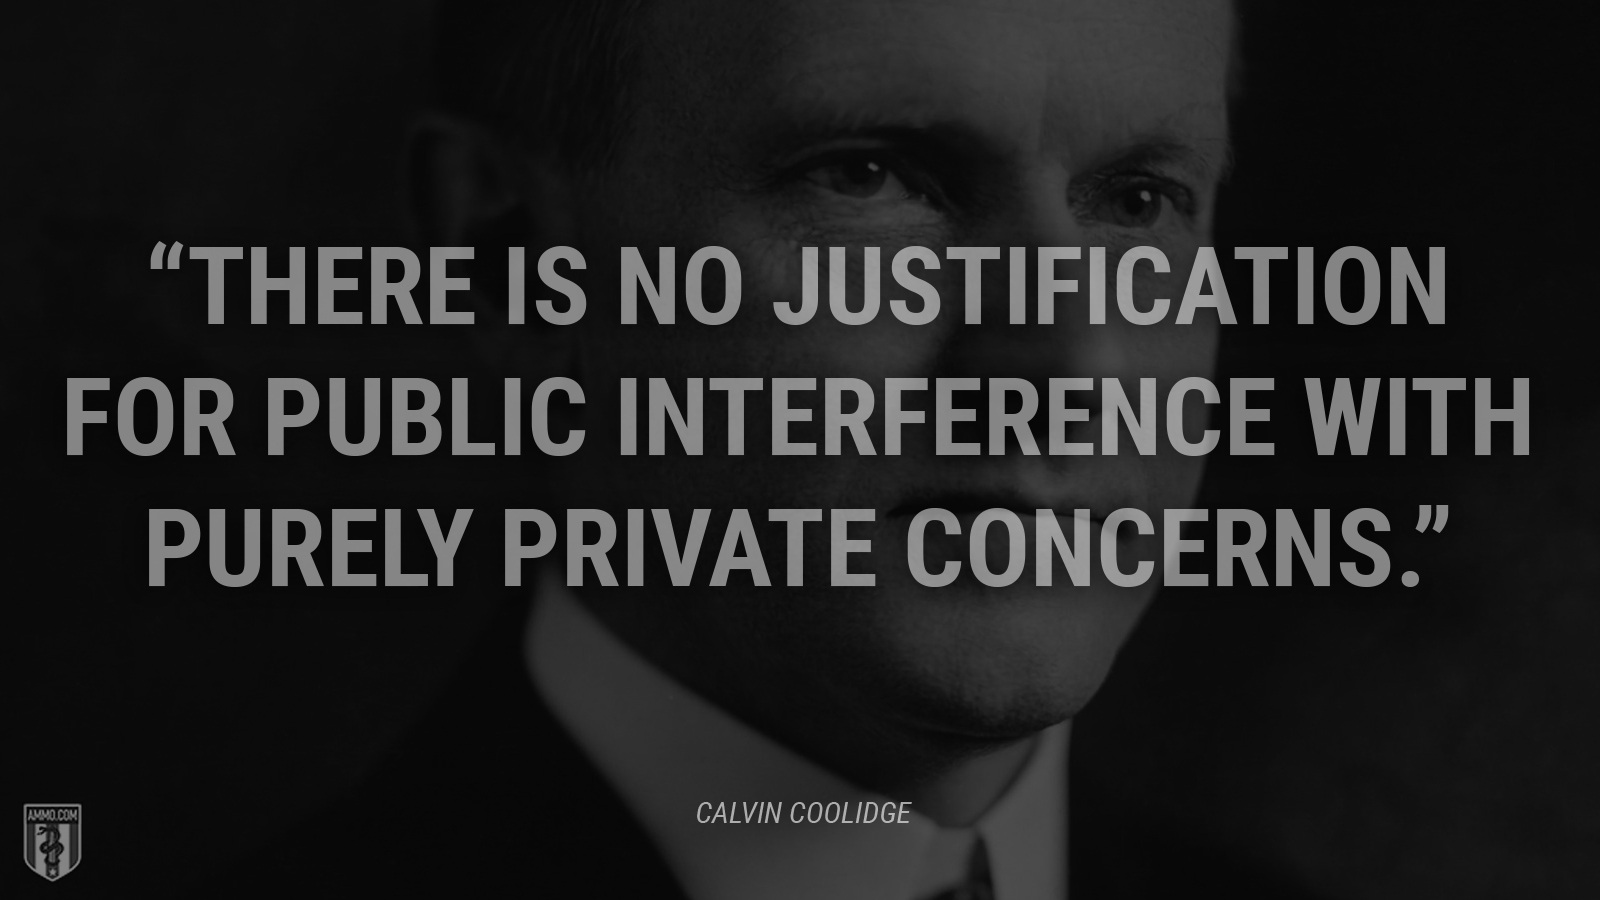 “There is no justification for public interference with purely private concerns.” - Calvin Coolidge